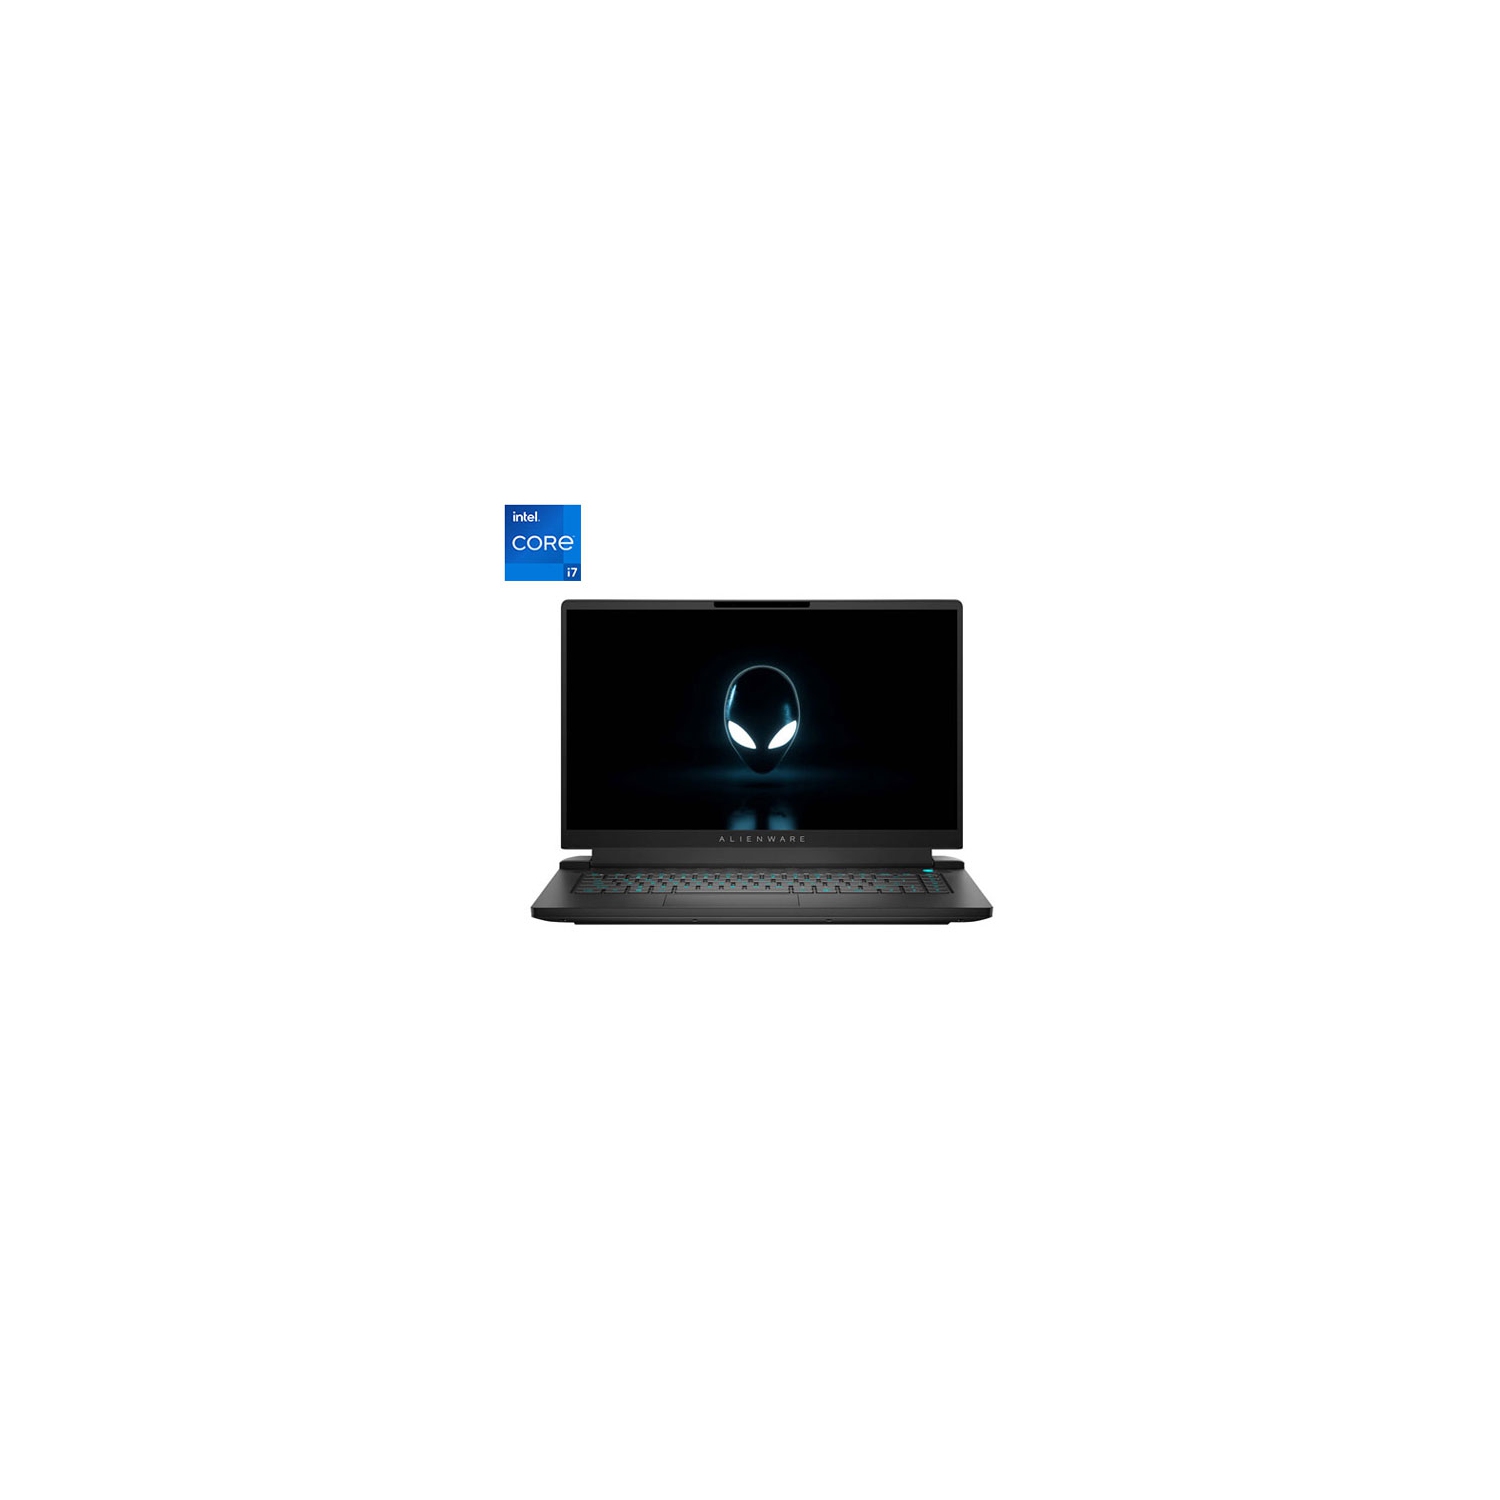 Refurbished (Excellent) - Dell Alienware m15 R7 15.6" Gaming Laptop (Intel Core i7-12700H/1TB SSD/16GB RAM/GeForce RTX 3070 Ti)